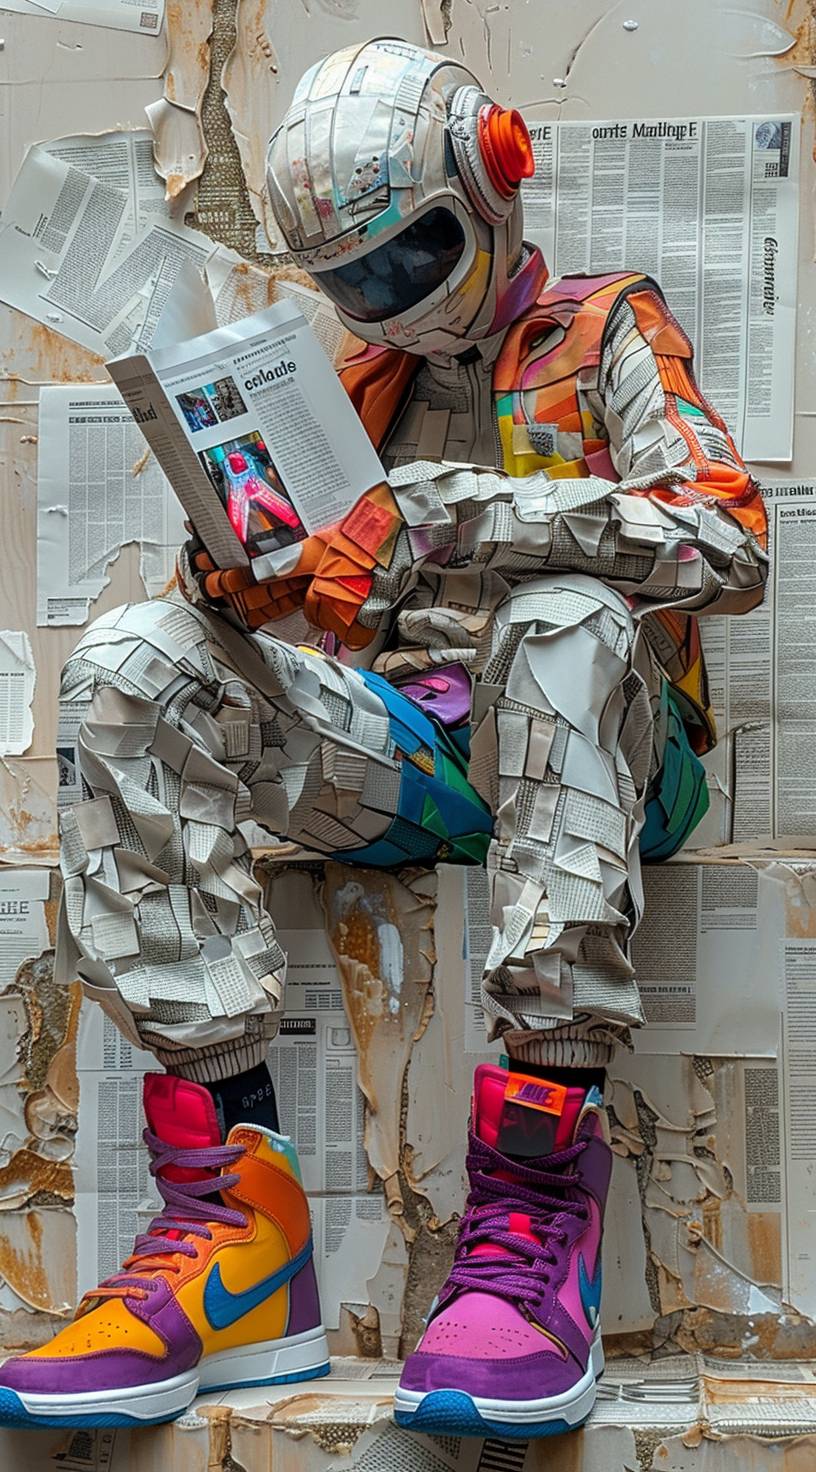 An art piece depicting an anthropomorphic robot wearing colorful Nike shoes, sitting on a wall and reading a magazine made entirely from pieces of paper. The style is hyperrealistic with intricate details, in the style of photorealism.